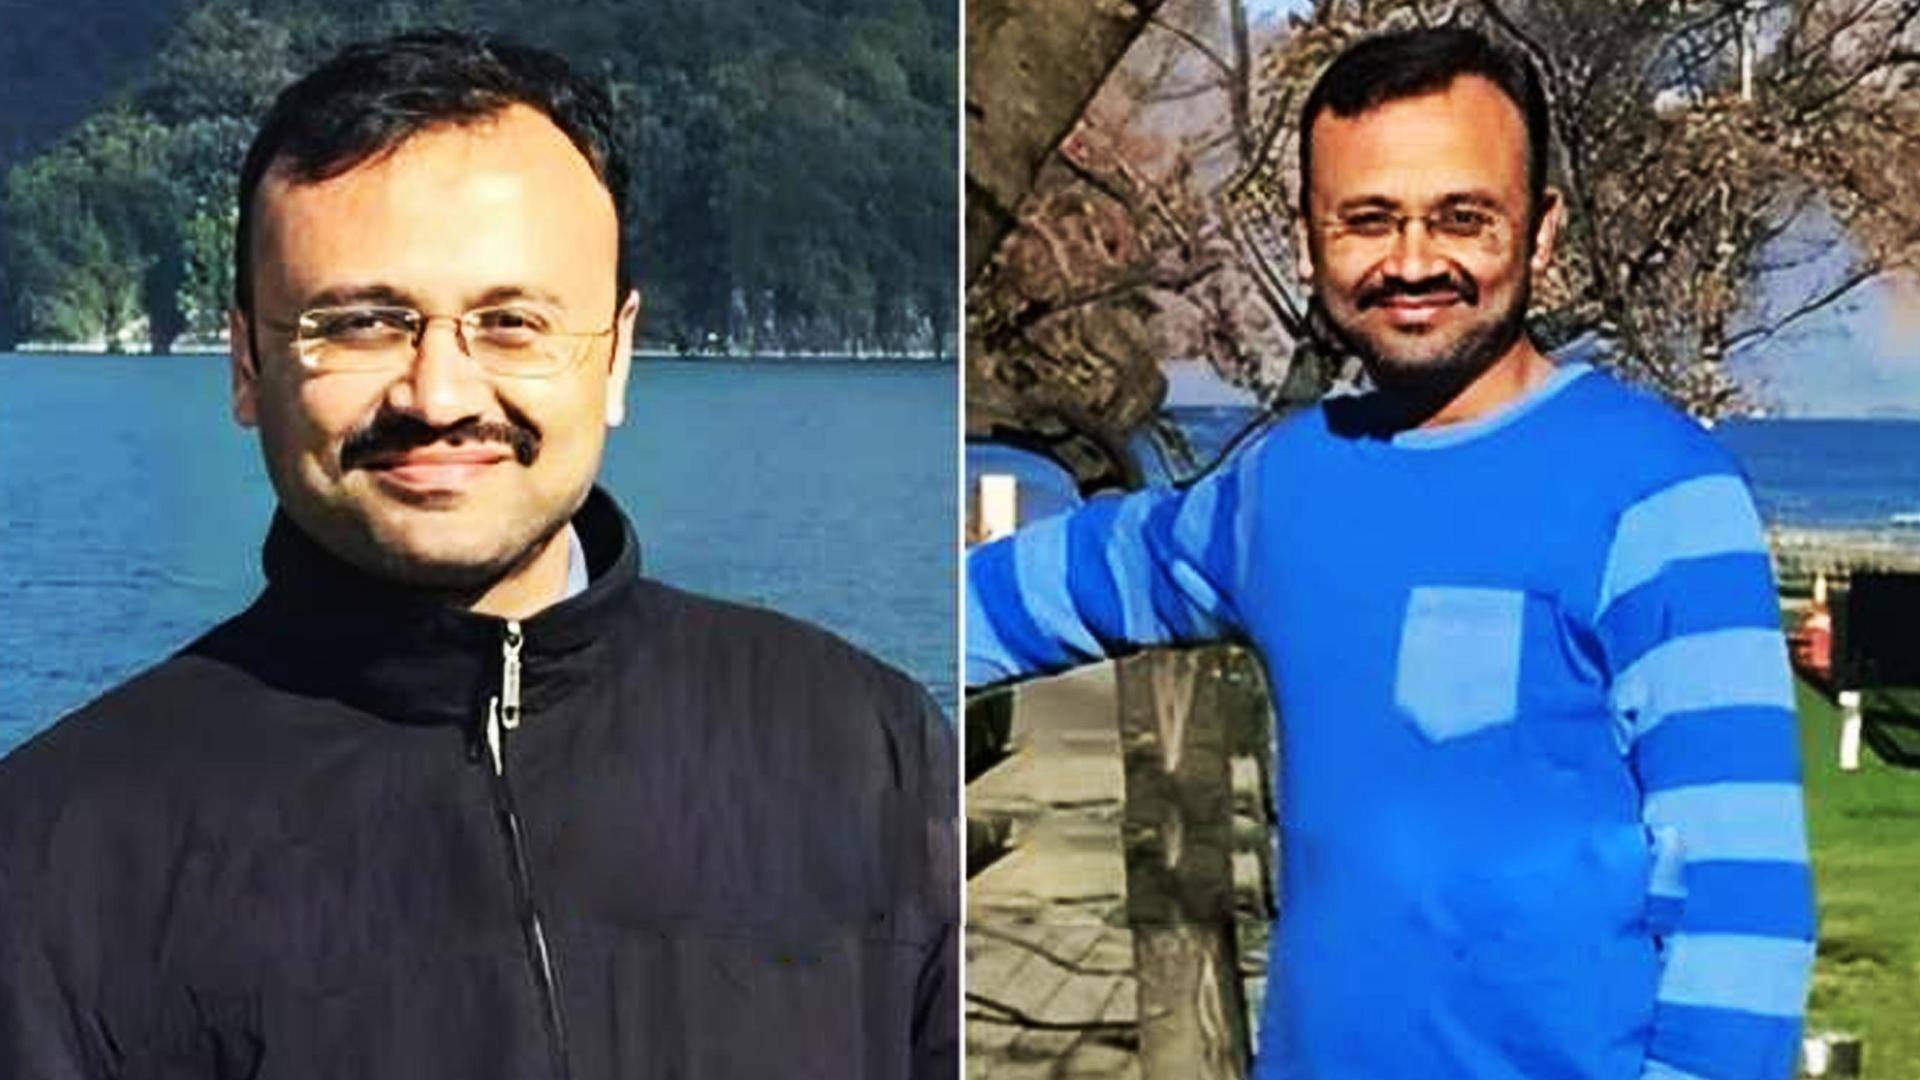 Cardiologist (41) who performed 16,000 surgeries dies of heart attack